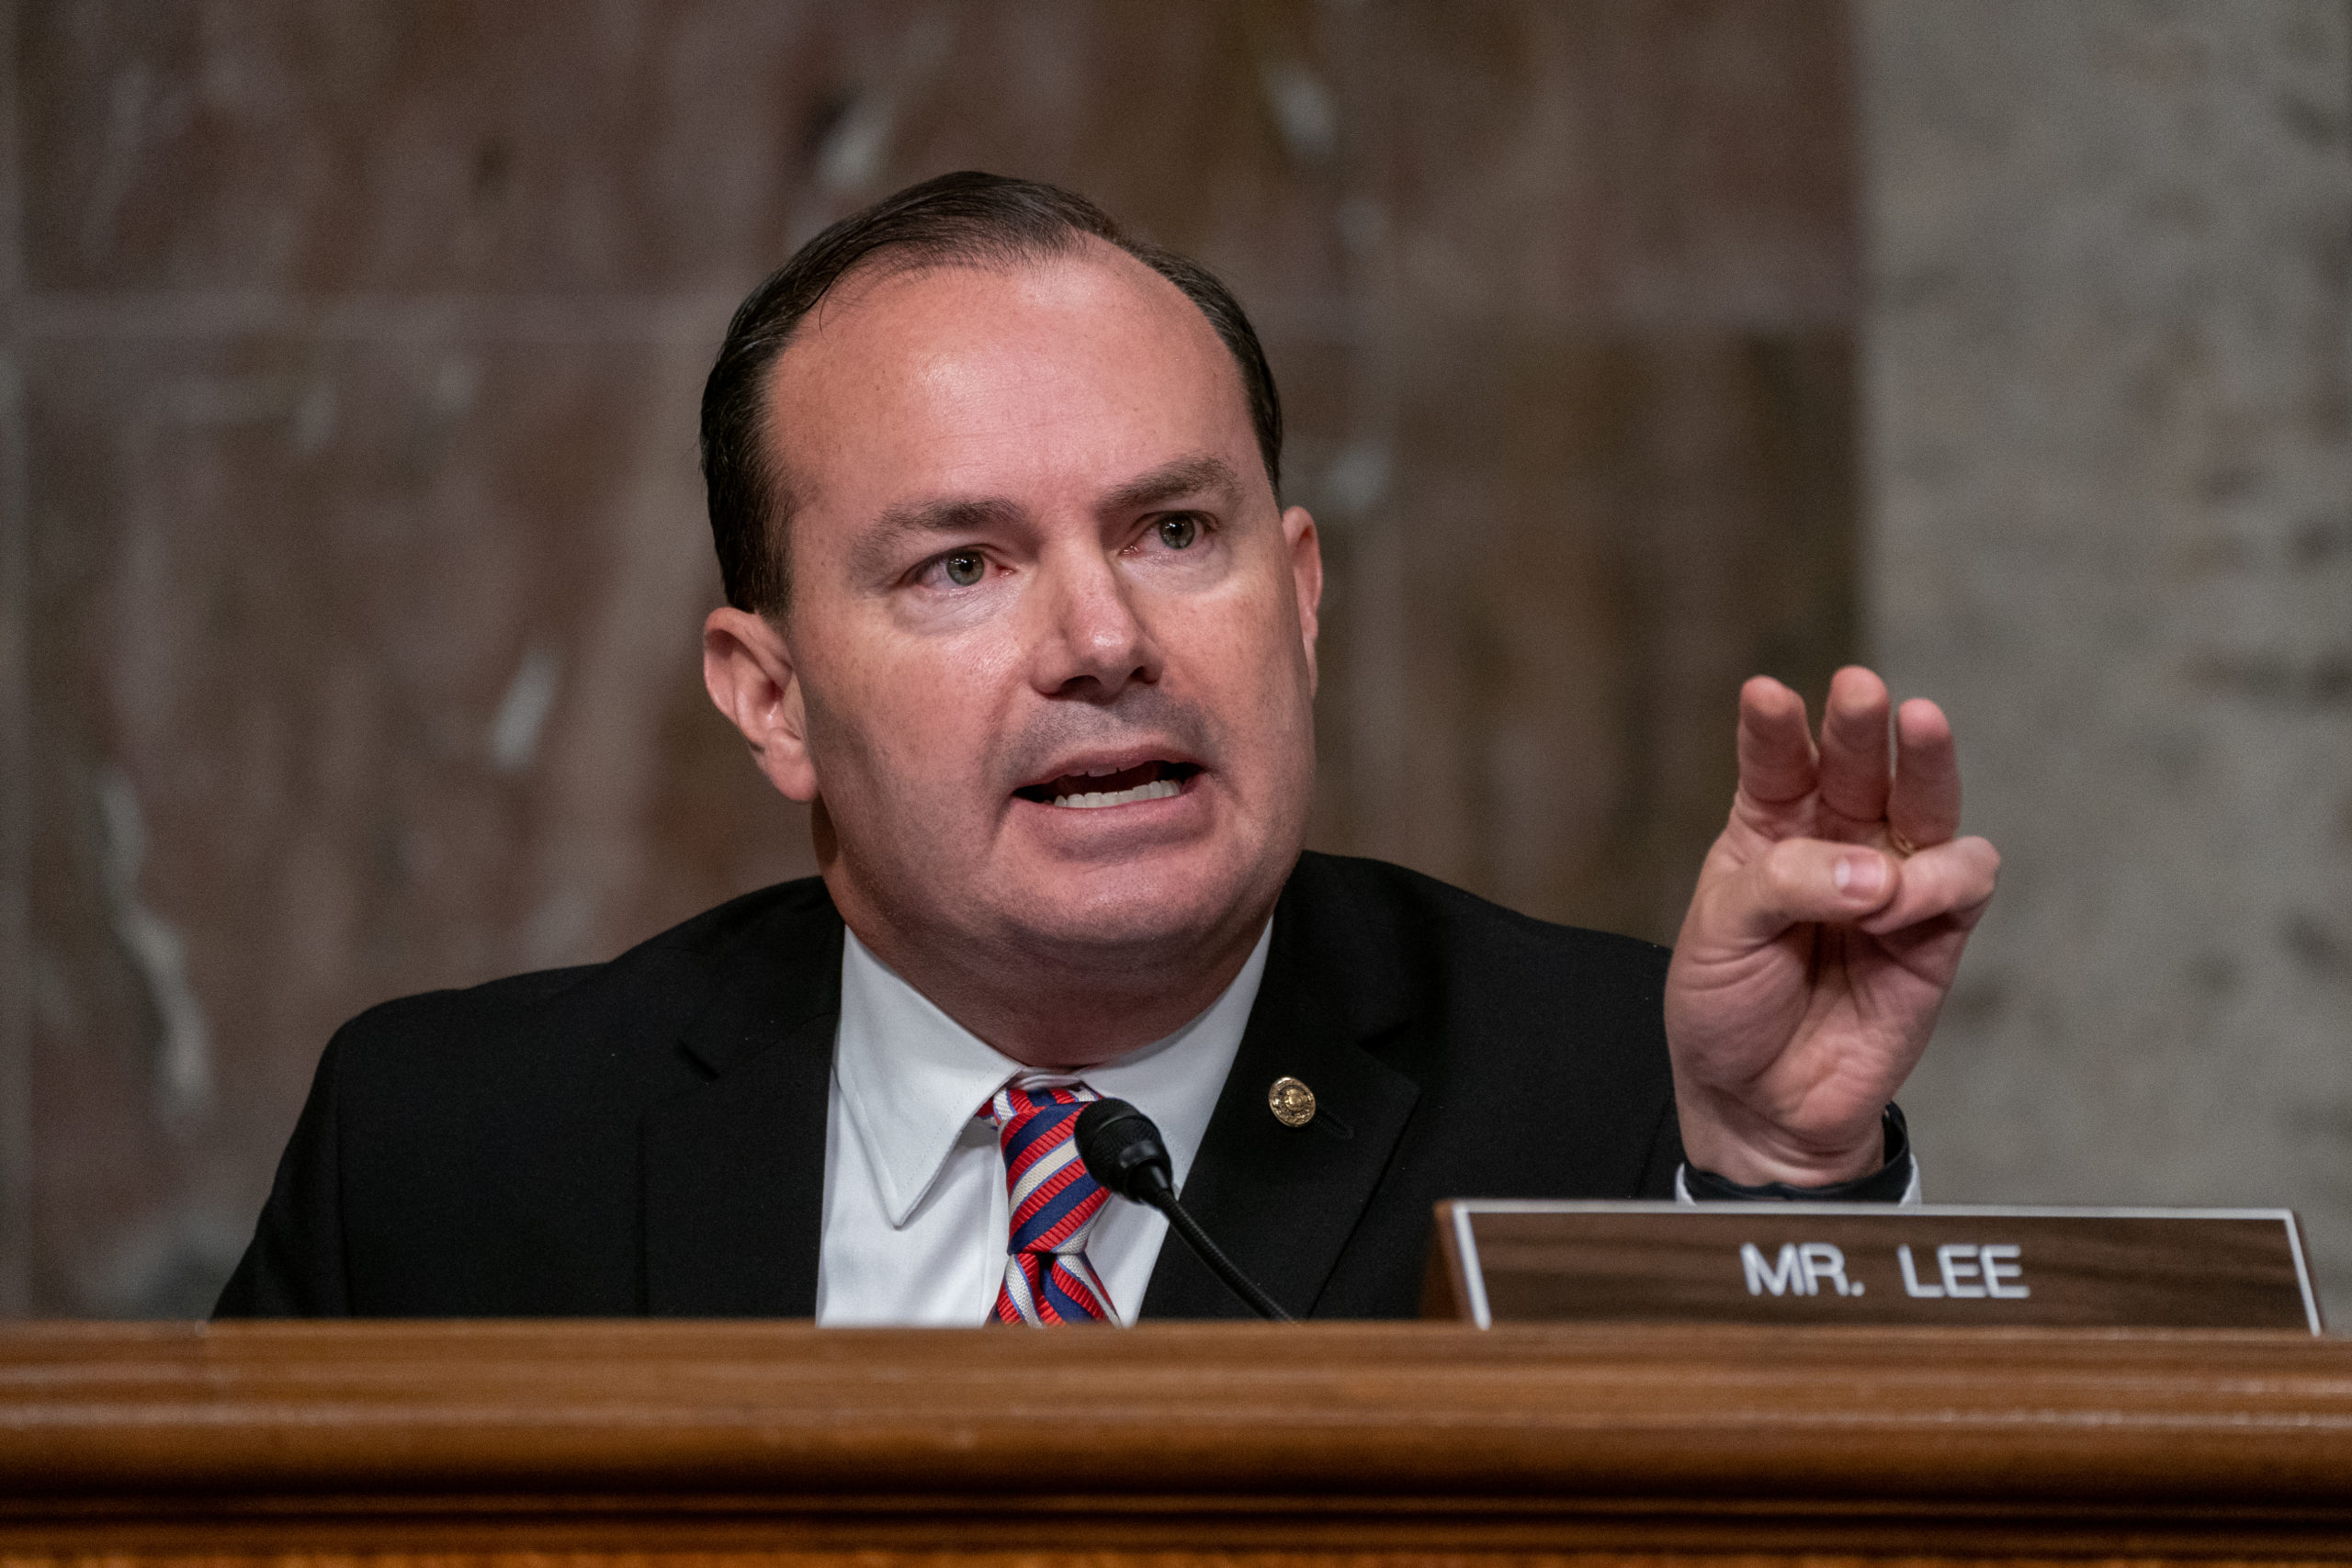 WASHINGTON, DC - SEPTEMBER 30: U.S. Sen. Mike Lee (R-UT) asks a question of former FBI Director James Comey at a hearing of the Senate Judiciary Committee on September 30, 2020 in Washington, DC. Comey was testifying in the committee's probe into the origins of the investigation into Russian interference in the 2016 election. (Photo by Ken Cedeno-Pool/Getty Images)